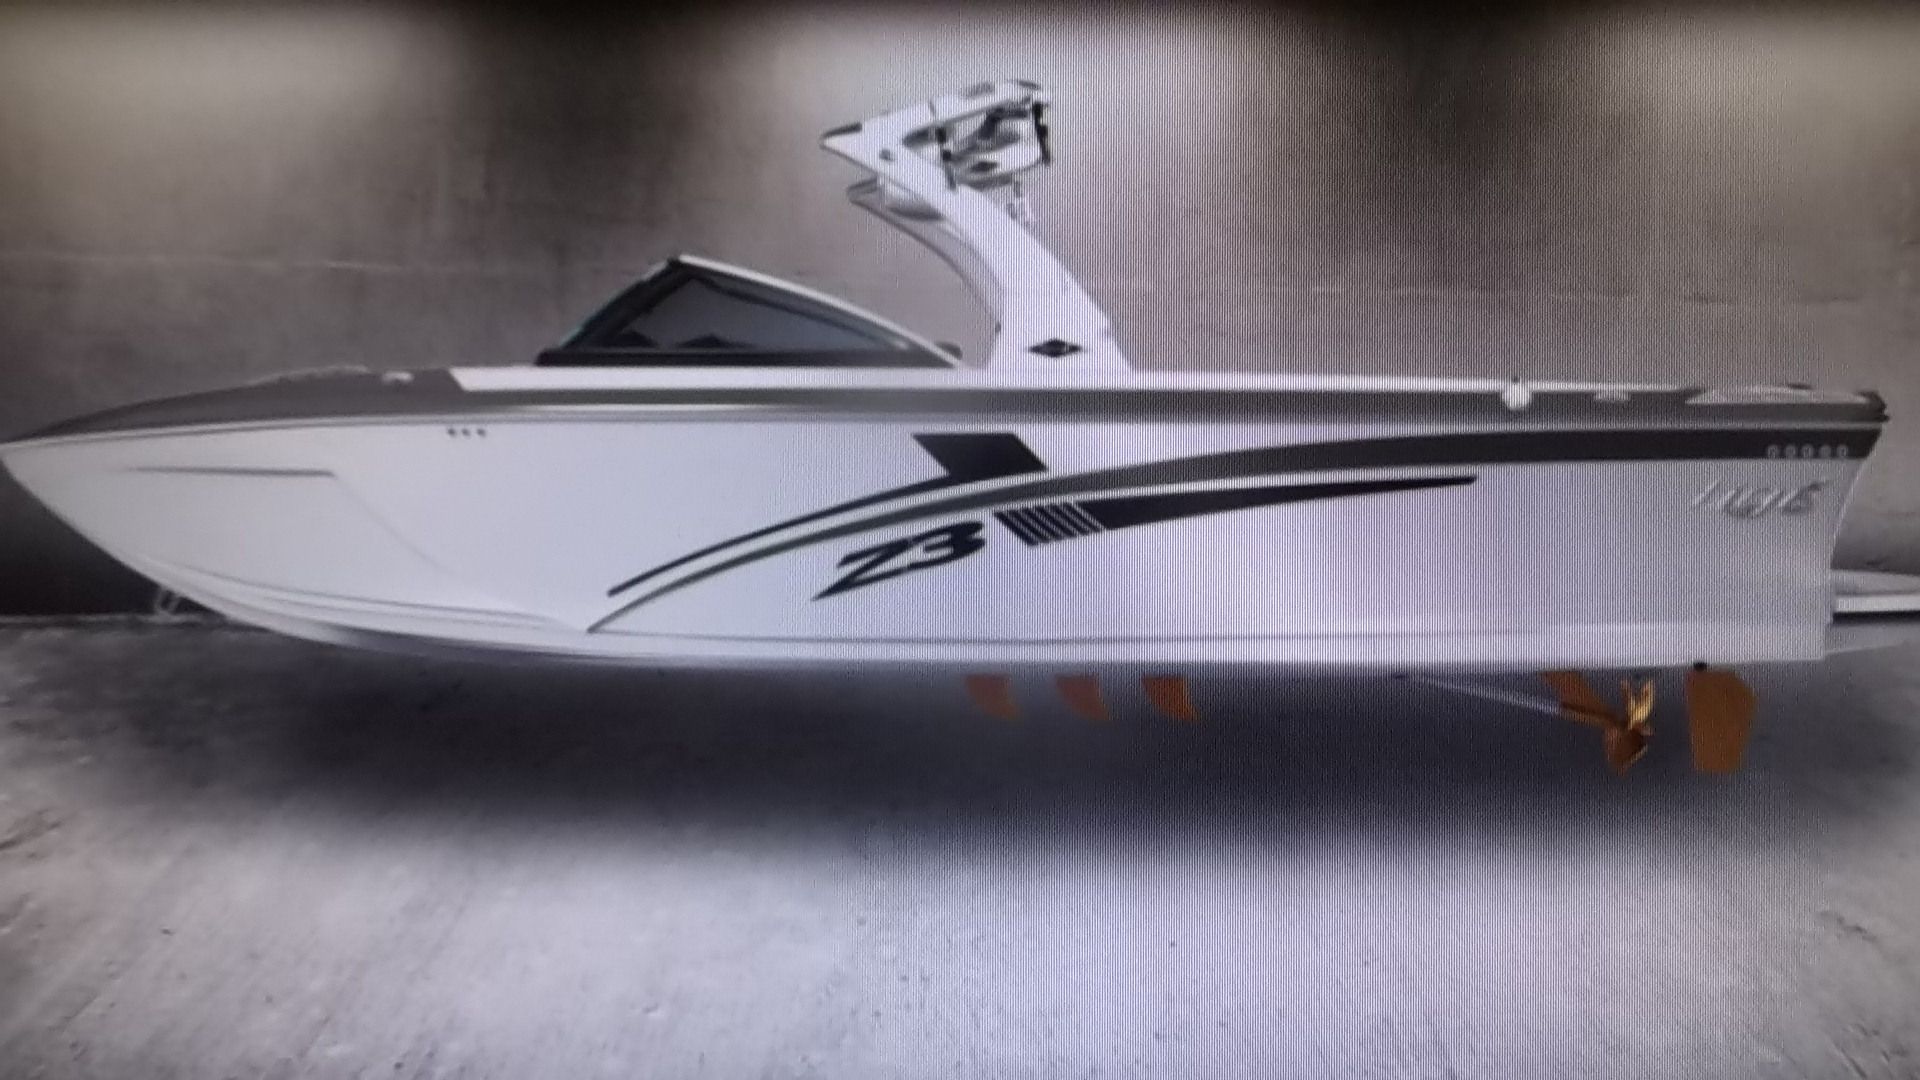 Used 2015 TIGE Z3 Power Boats Inboard in Spearfish, SD | Stock Number ...